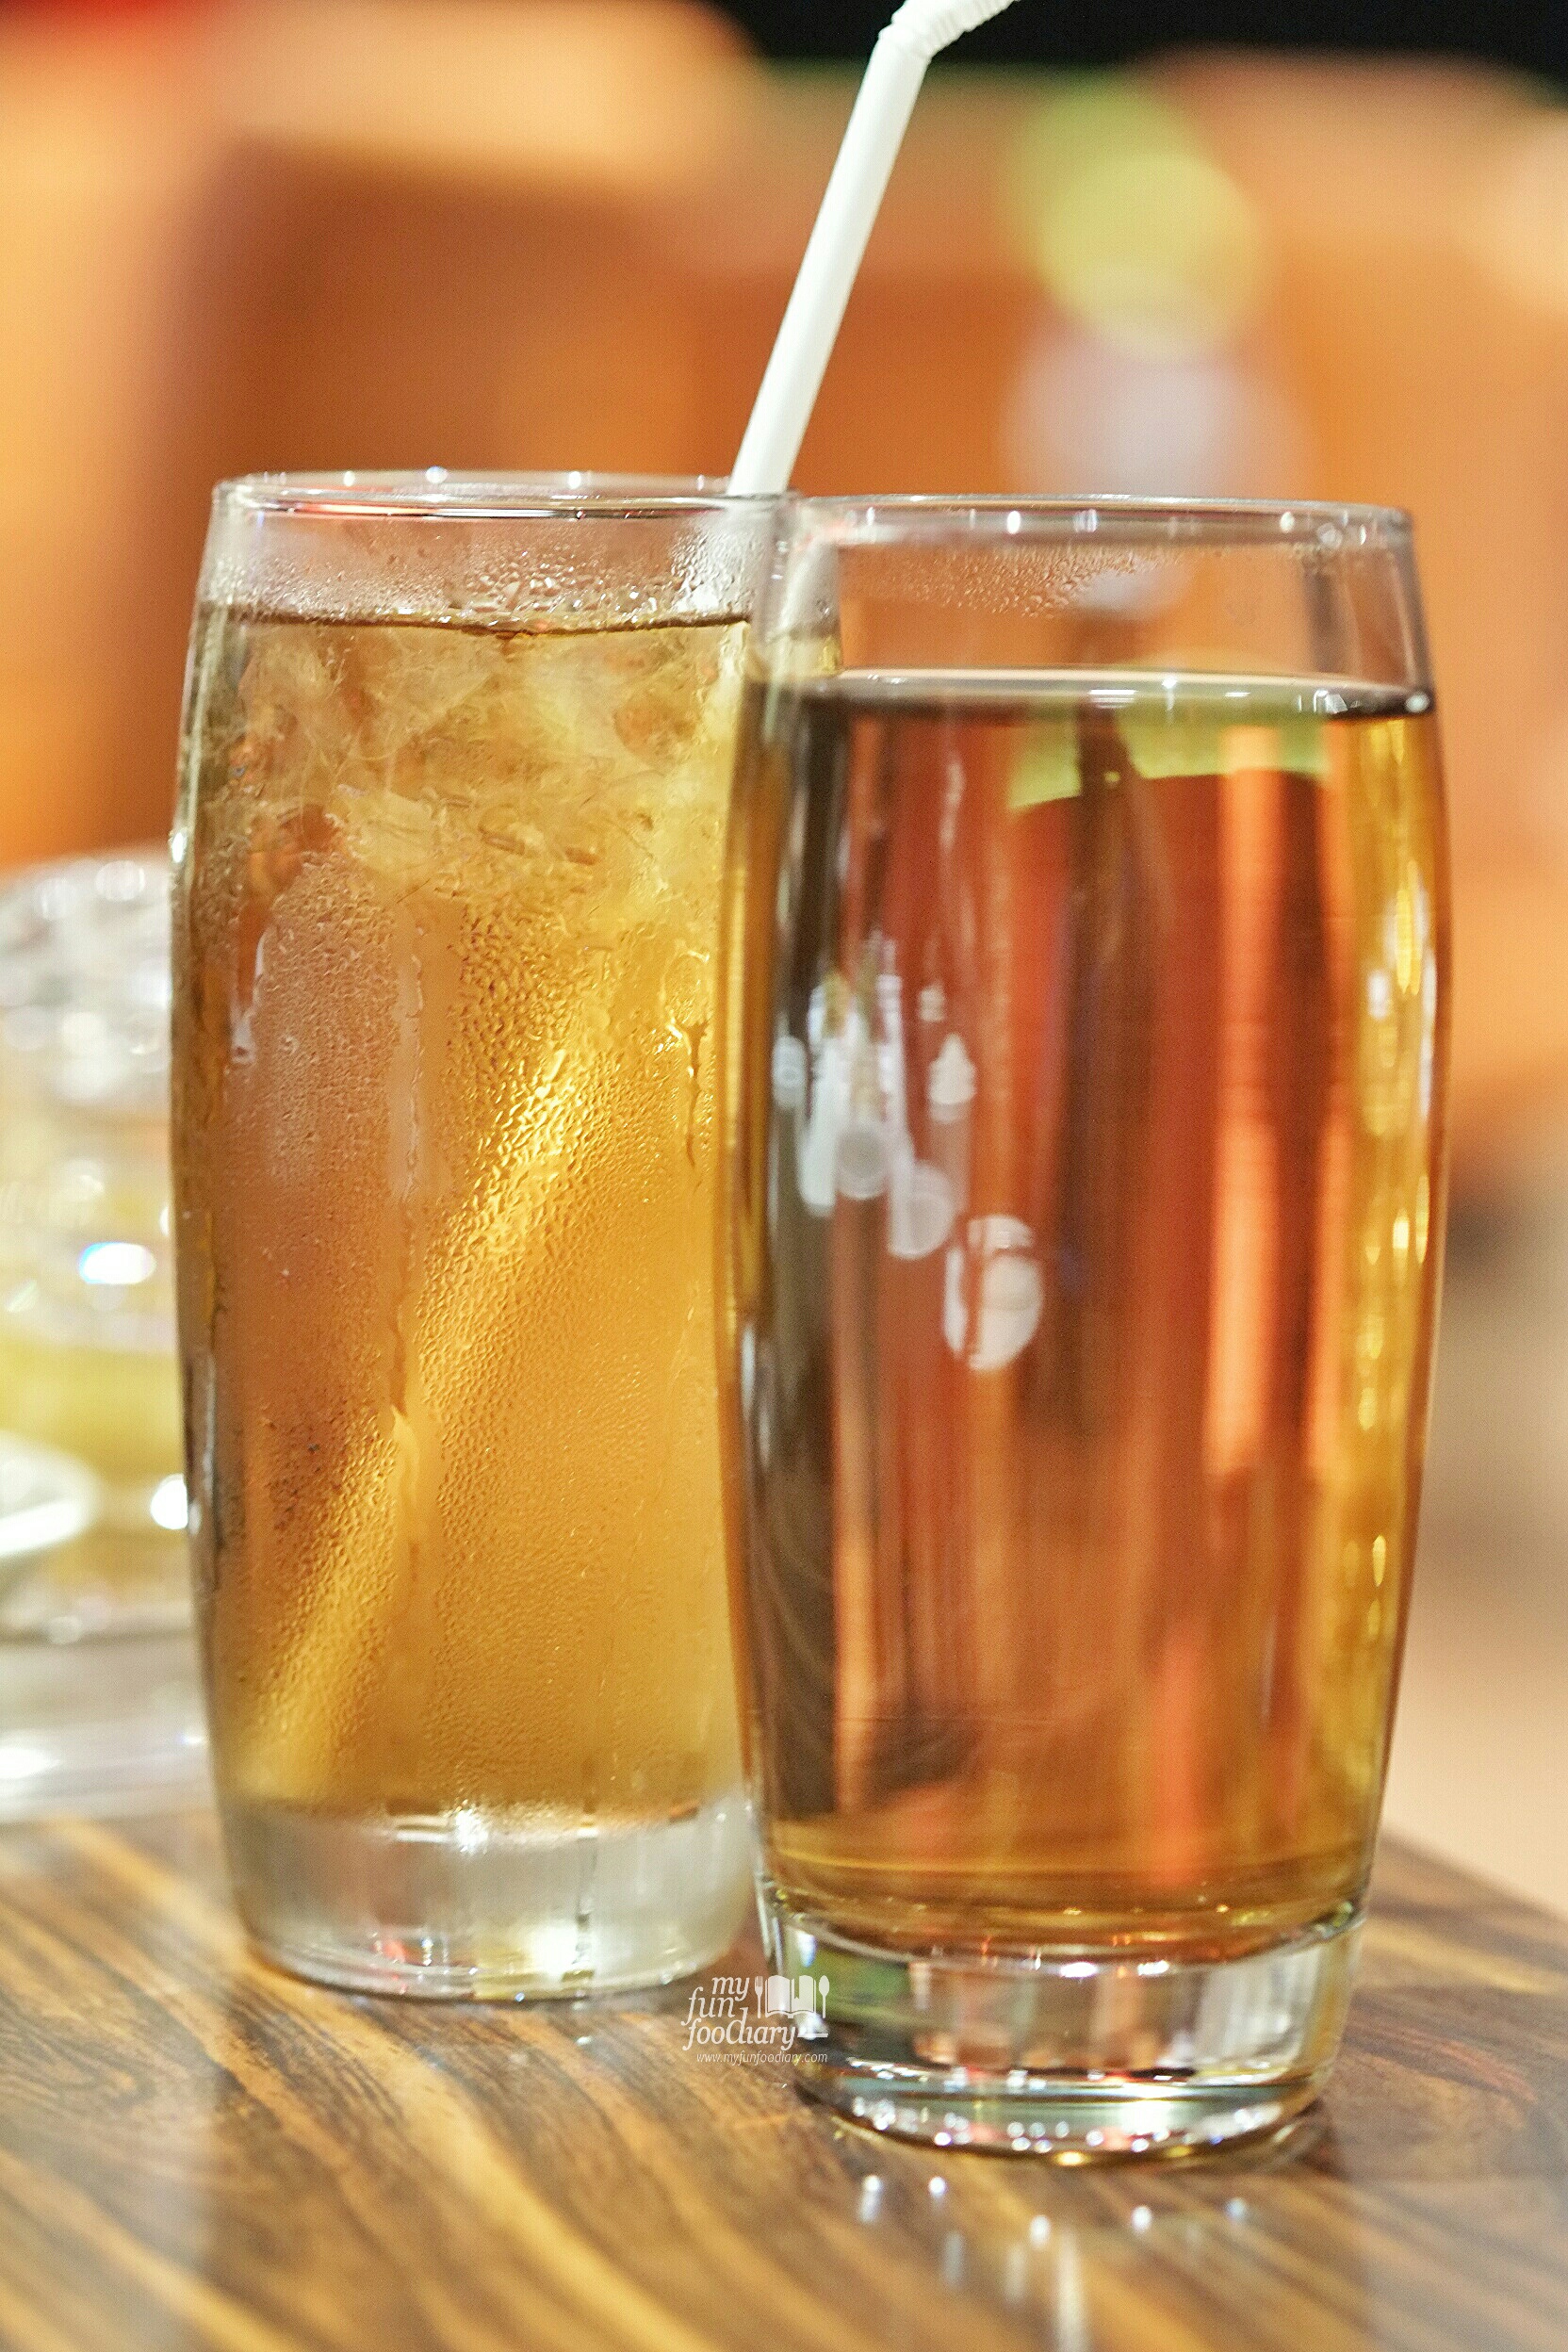 Ice Tea and Hot Tea at Three in One Cafe and Bistro by Myfunfoodiary